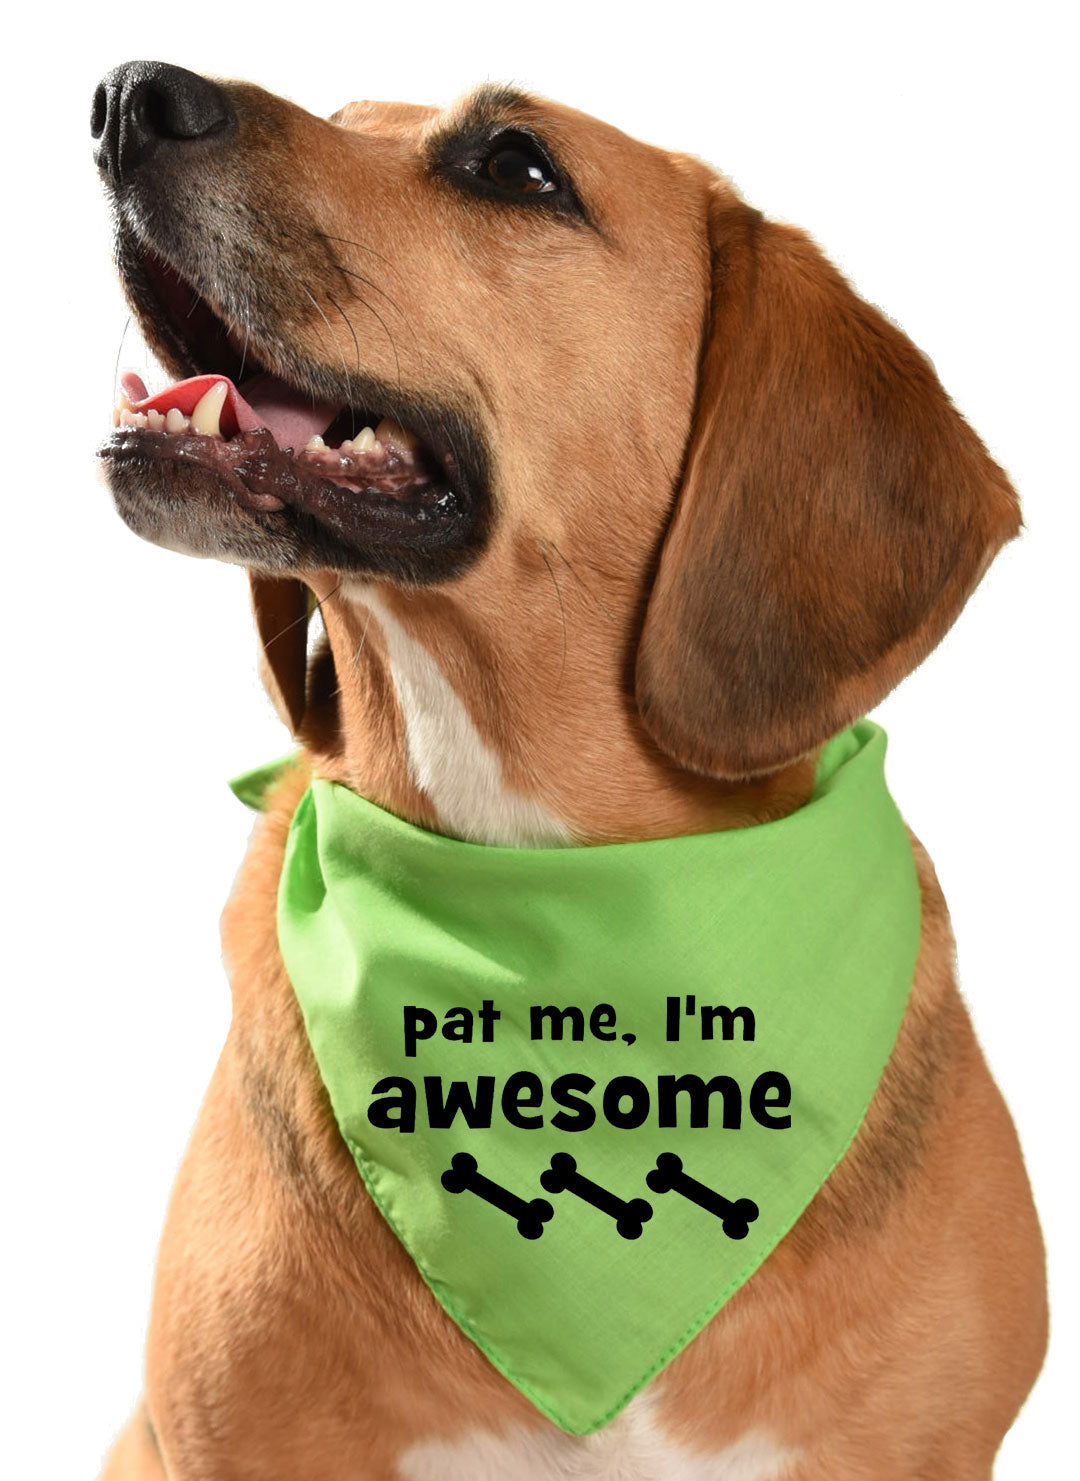 pat me i'm awesome dog bandana for friendly dogs and puppies who love attention and fuss